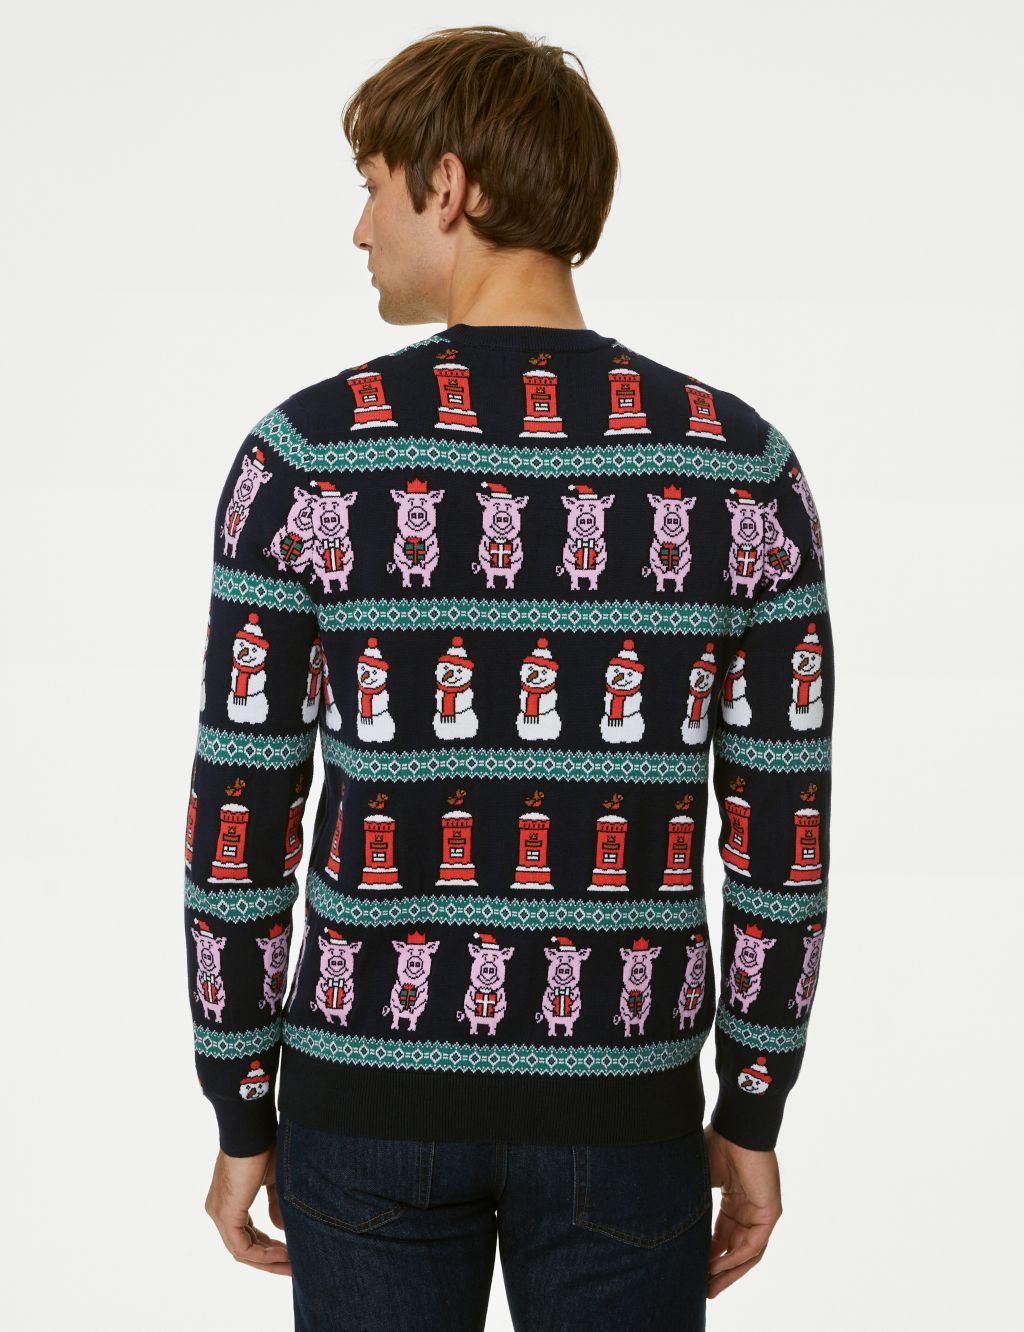 Pure Cotton Percy Pig™ Christmas Jumper image 4